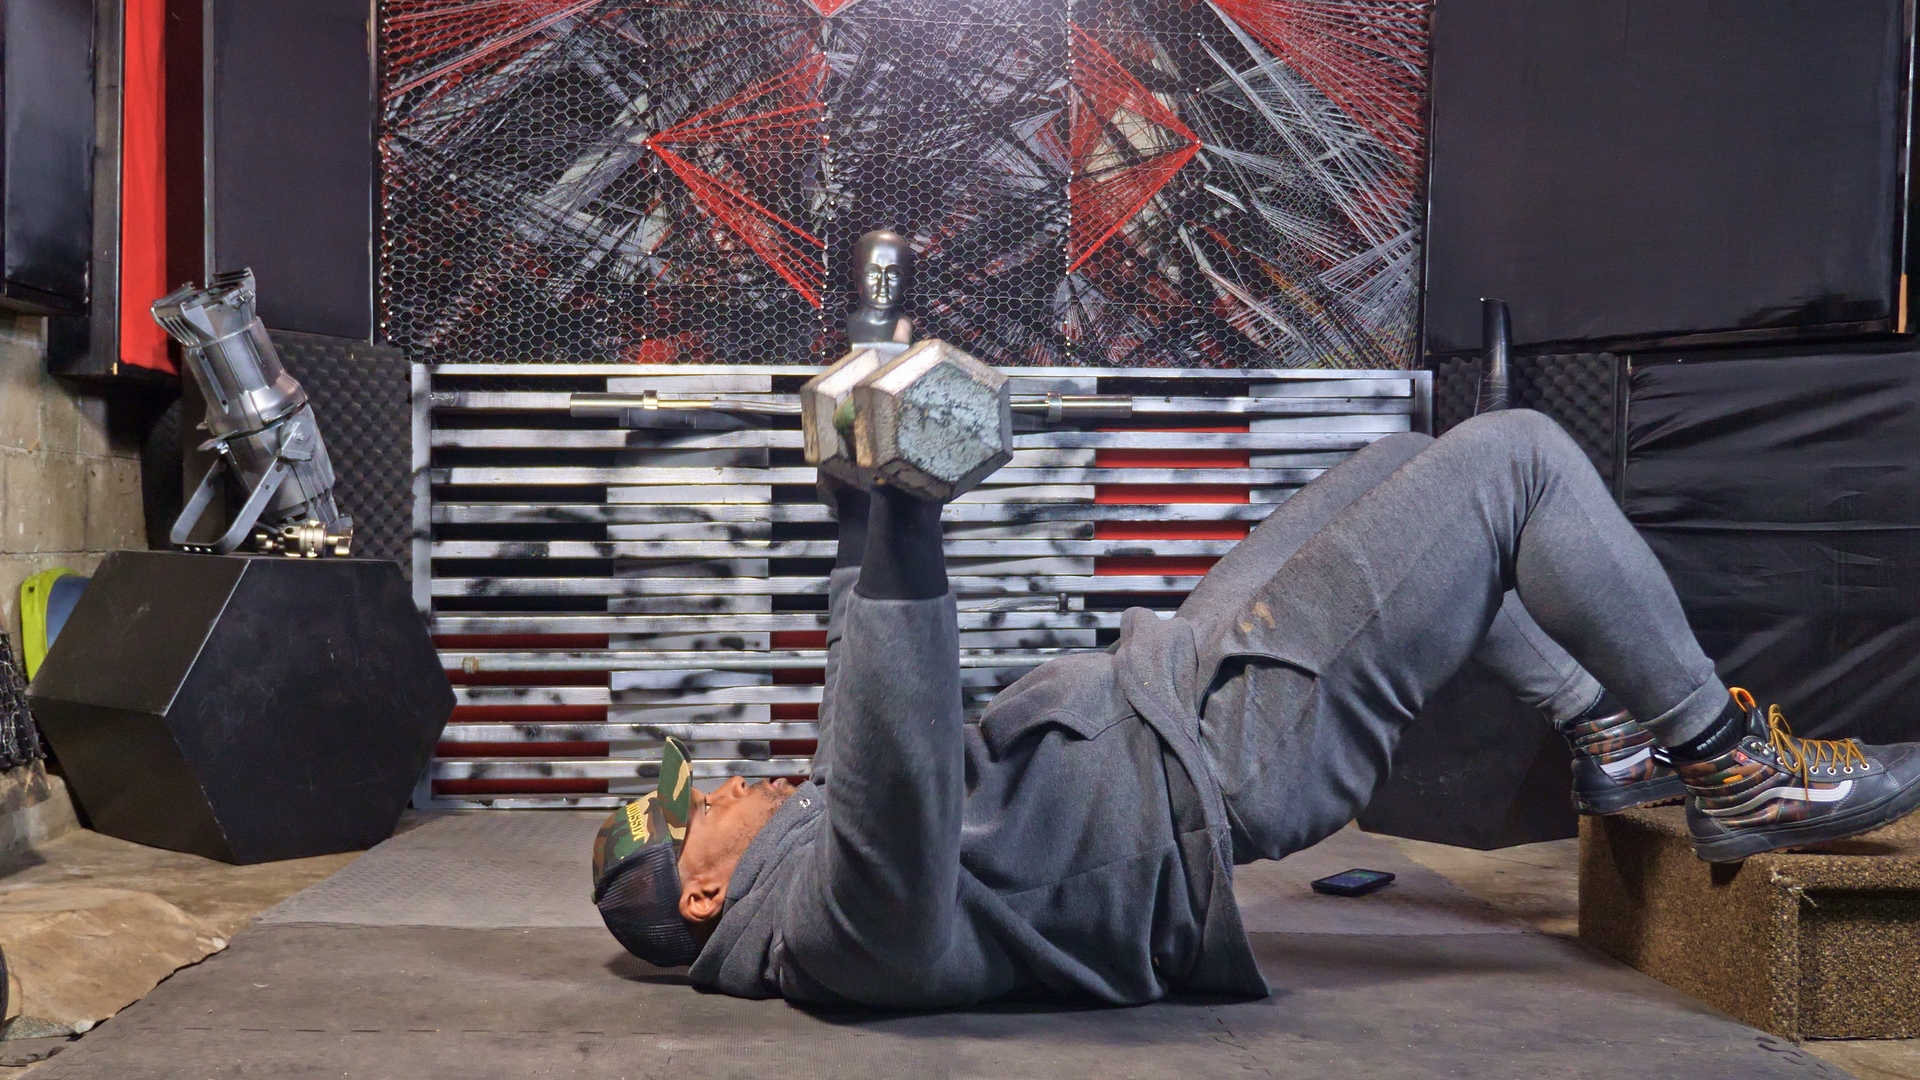 Dumbbell Chest Workout No Bench Exercise 2 –
The Decline Dumbbell Floor Press: Finish Position